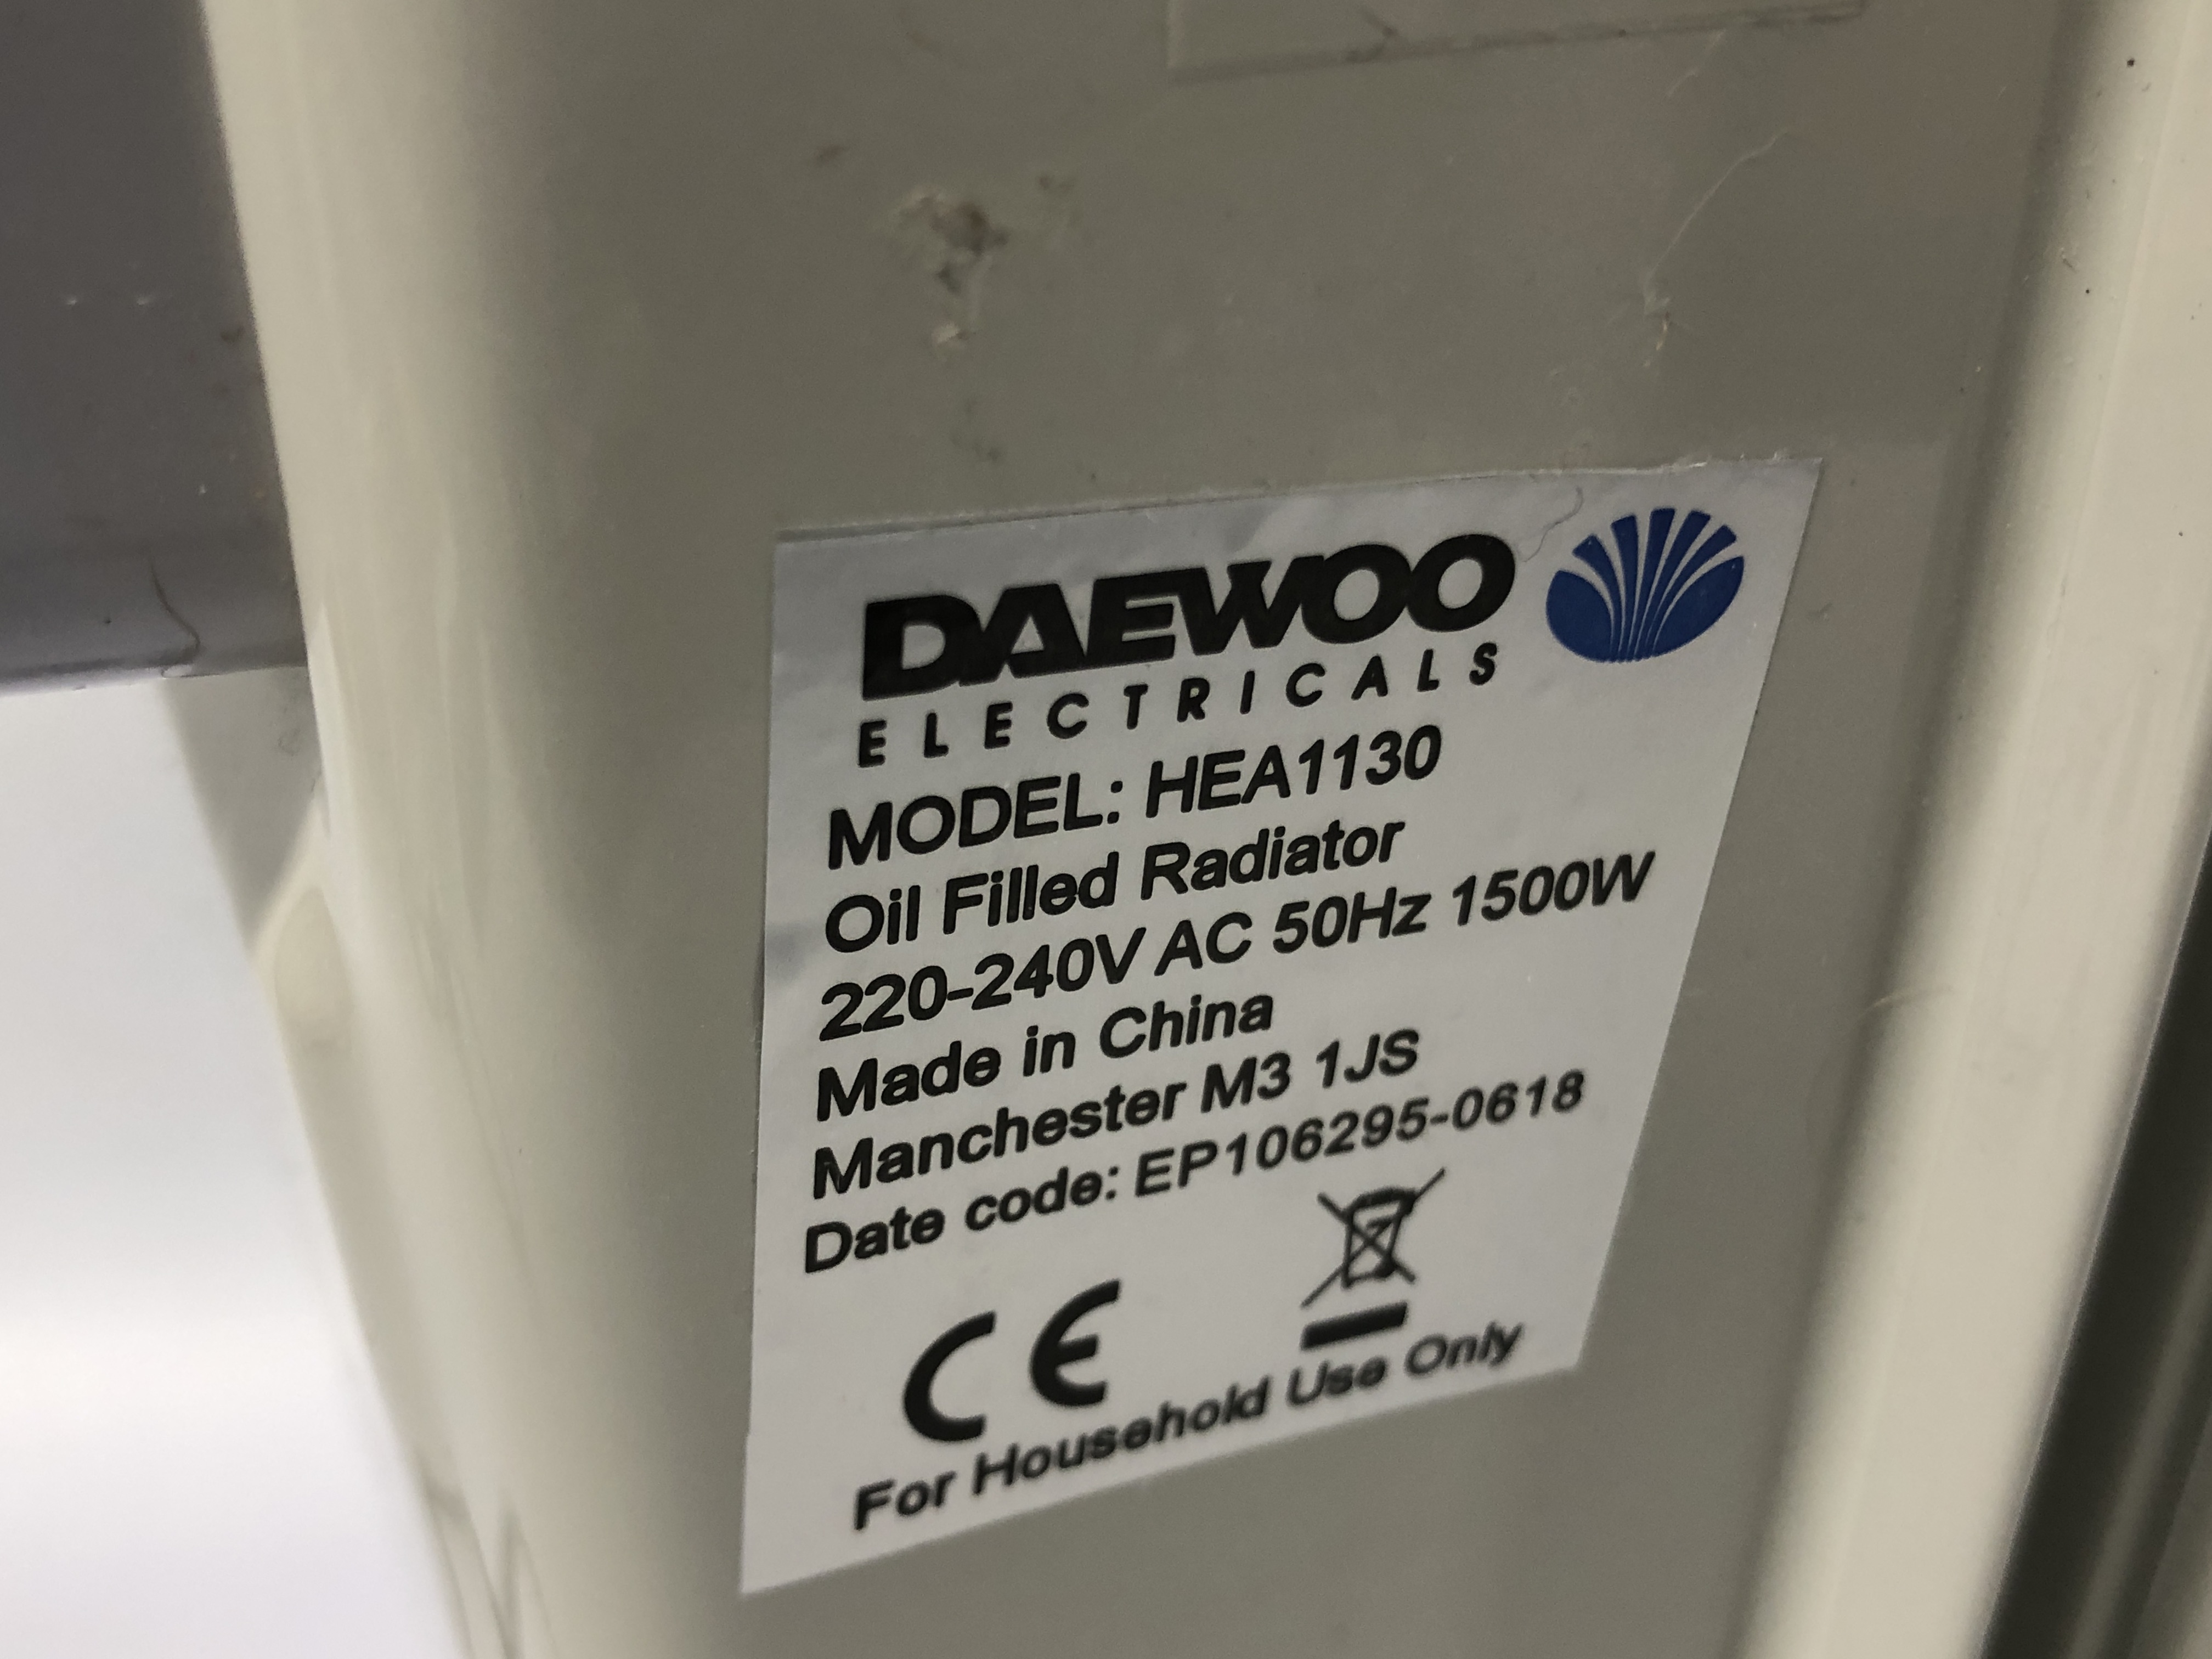 2 DAEWOO OIL FITTED ELECTRIC HEATERS, WHEELED HEATER H 54CM, W 32CM, SMALLER HEATER H 35CM, - Image 8 of 9